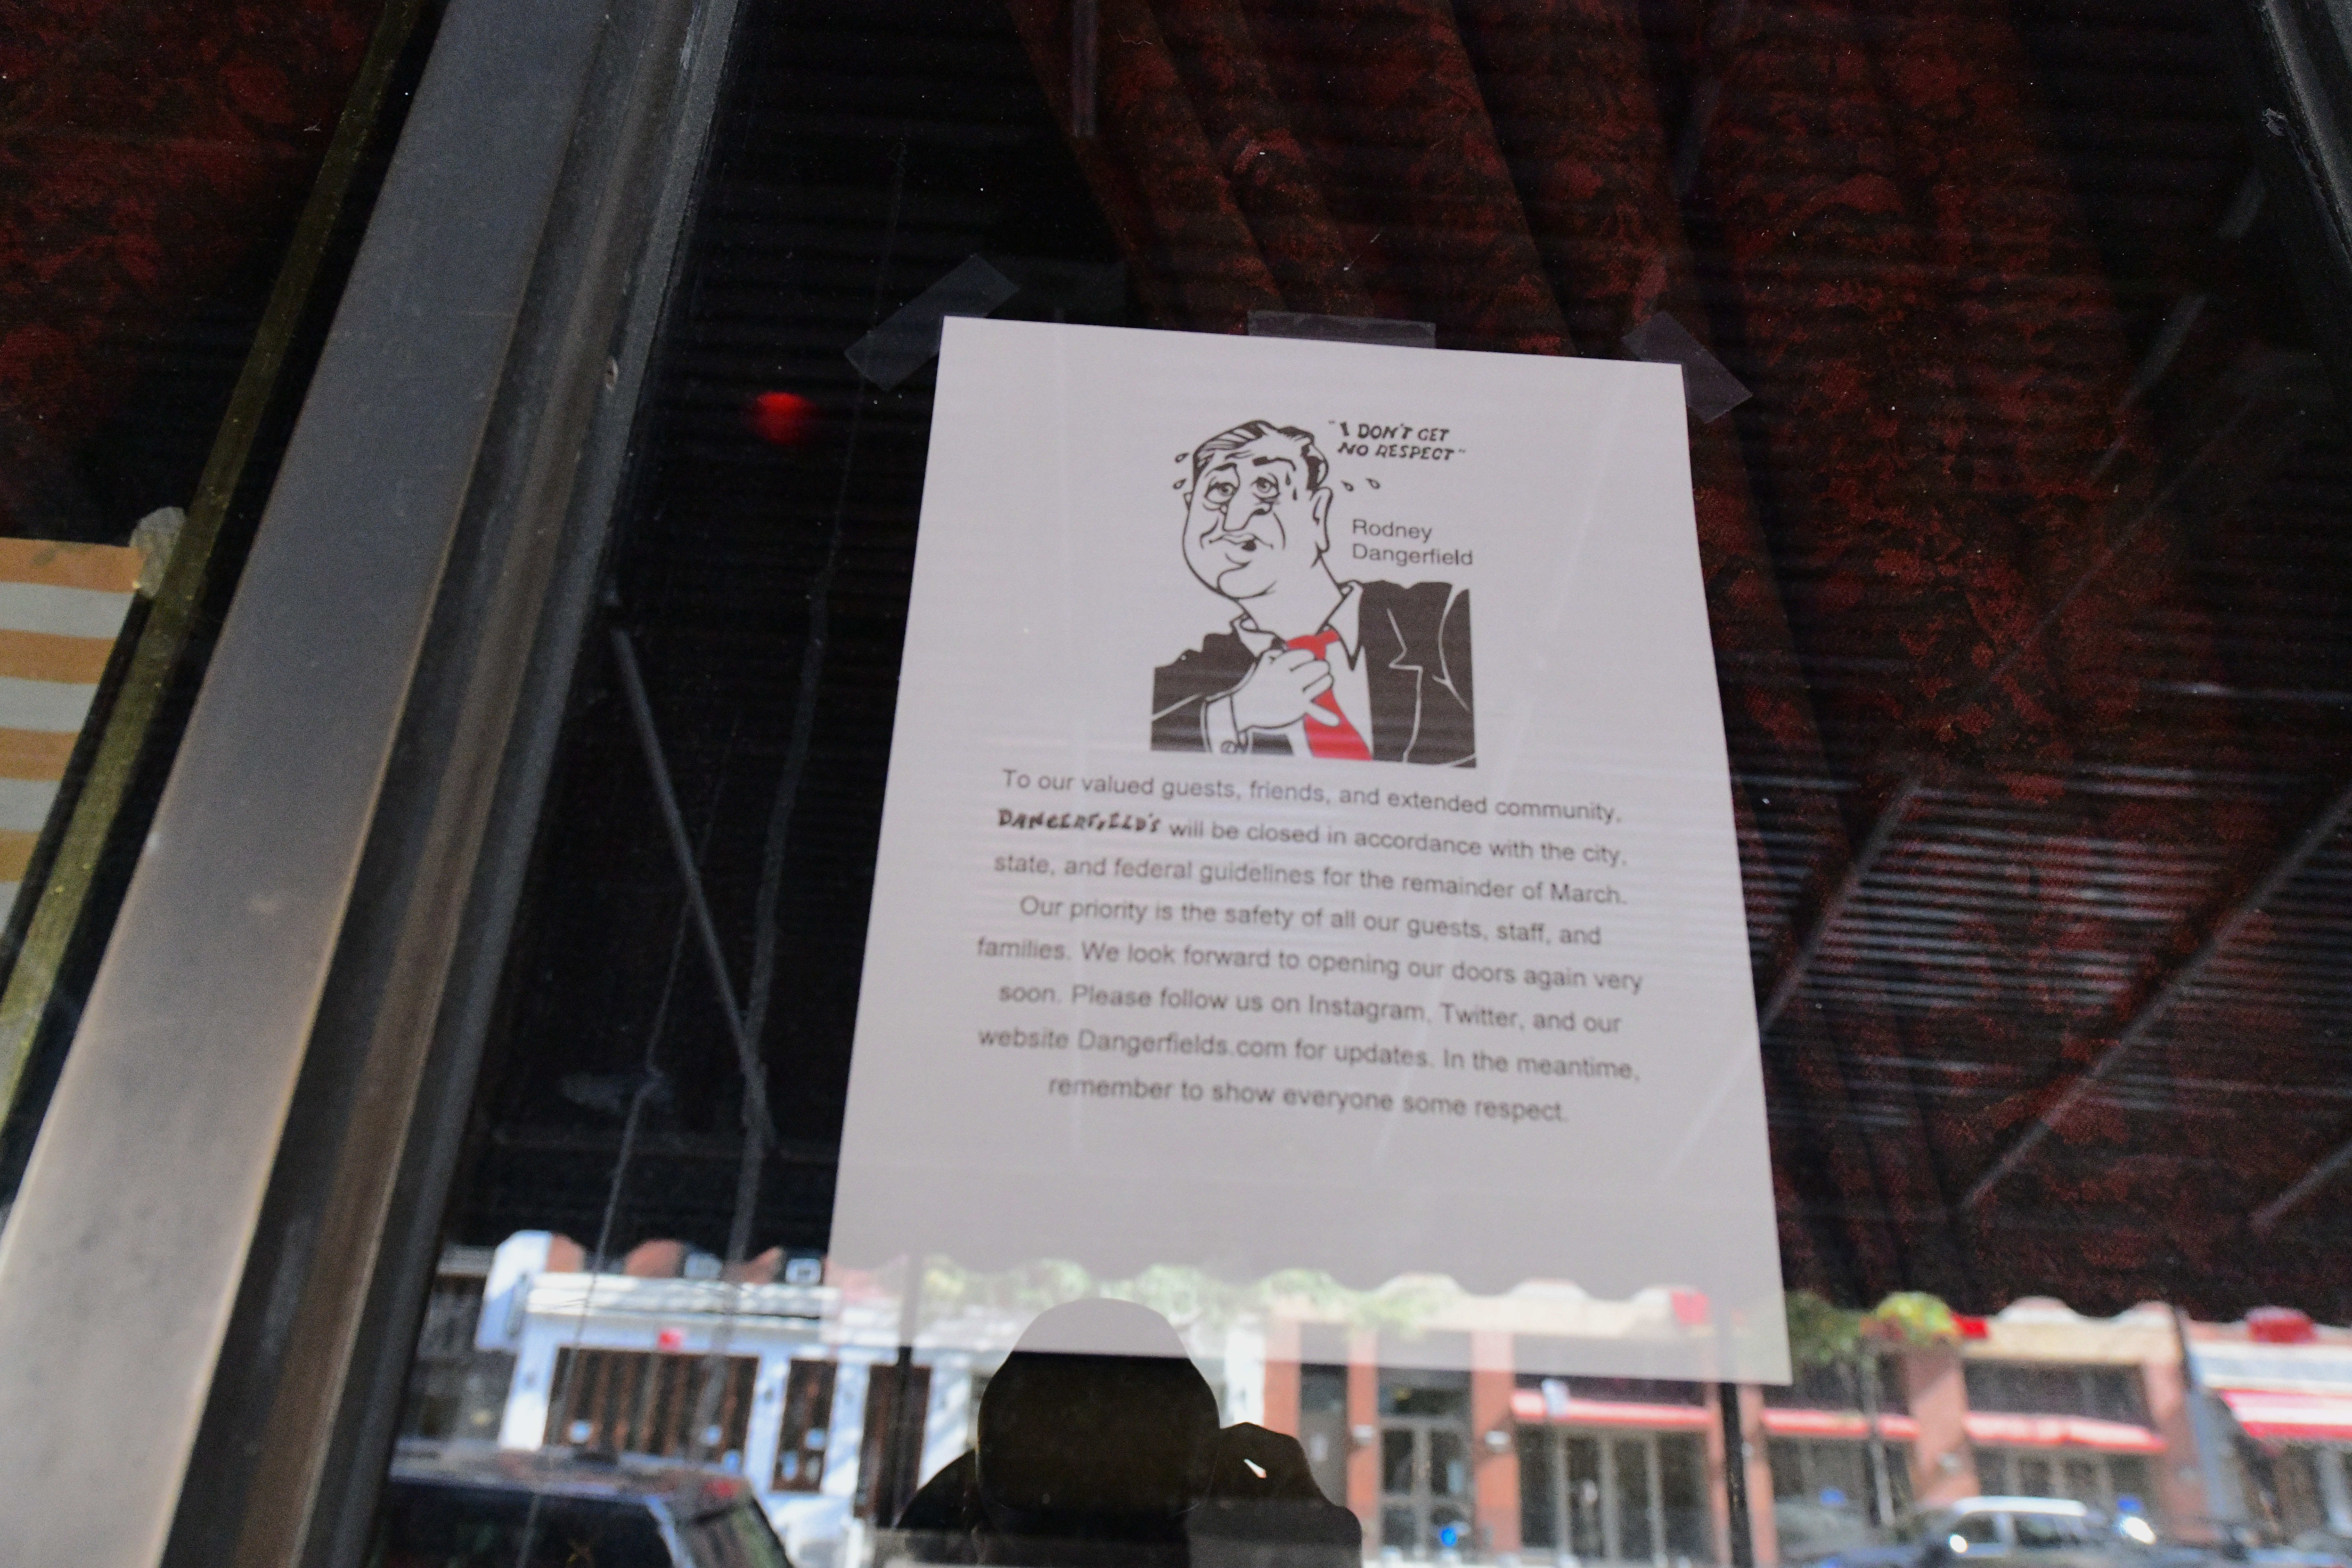 Dangerfield’s comedy club closure is another troubling sign for New